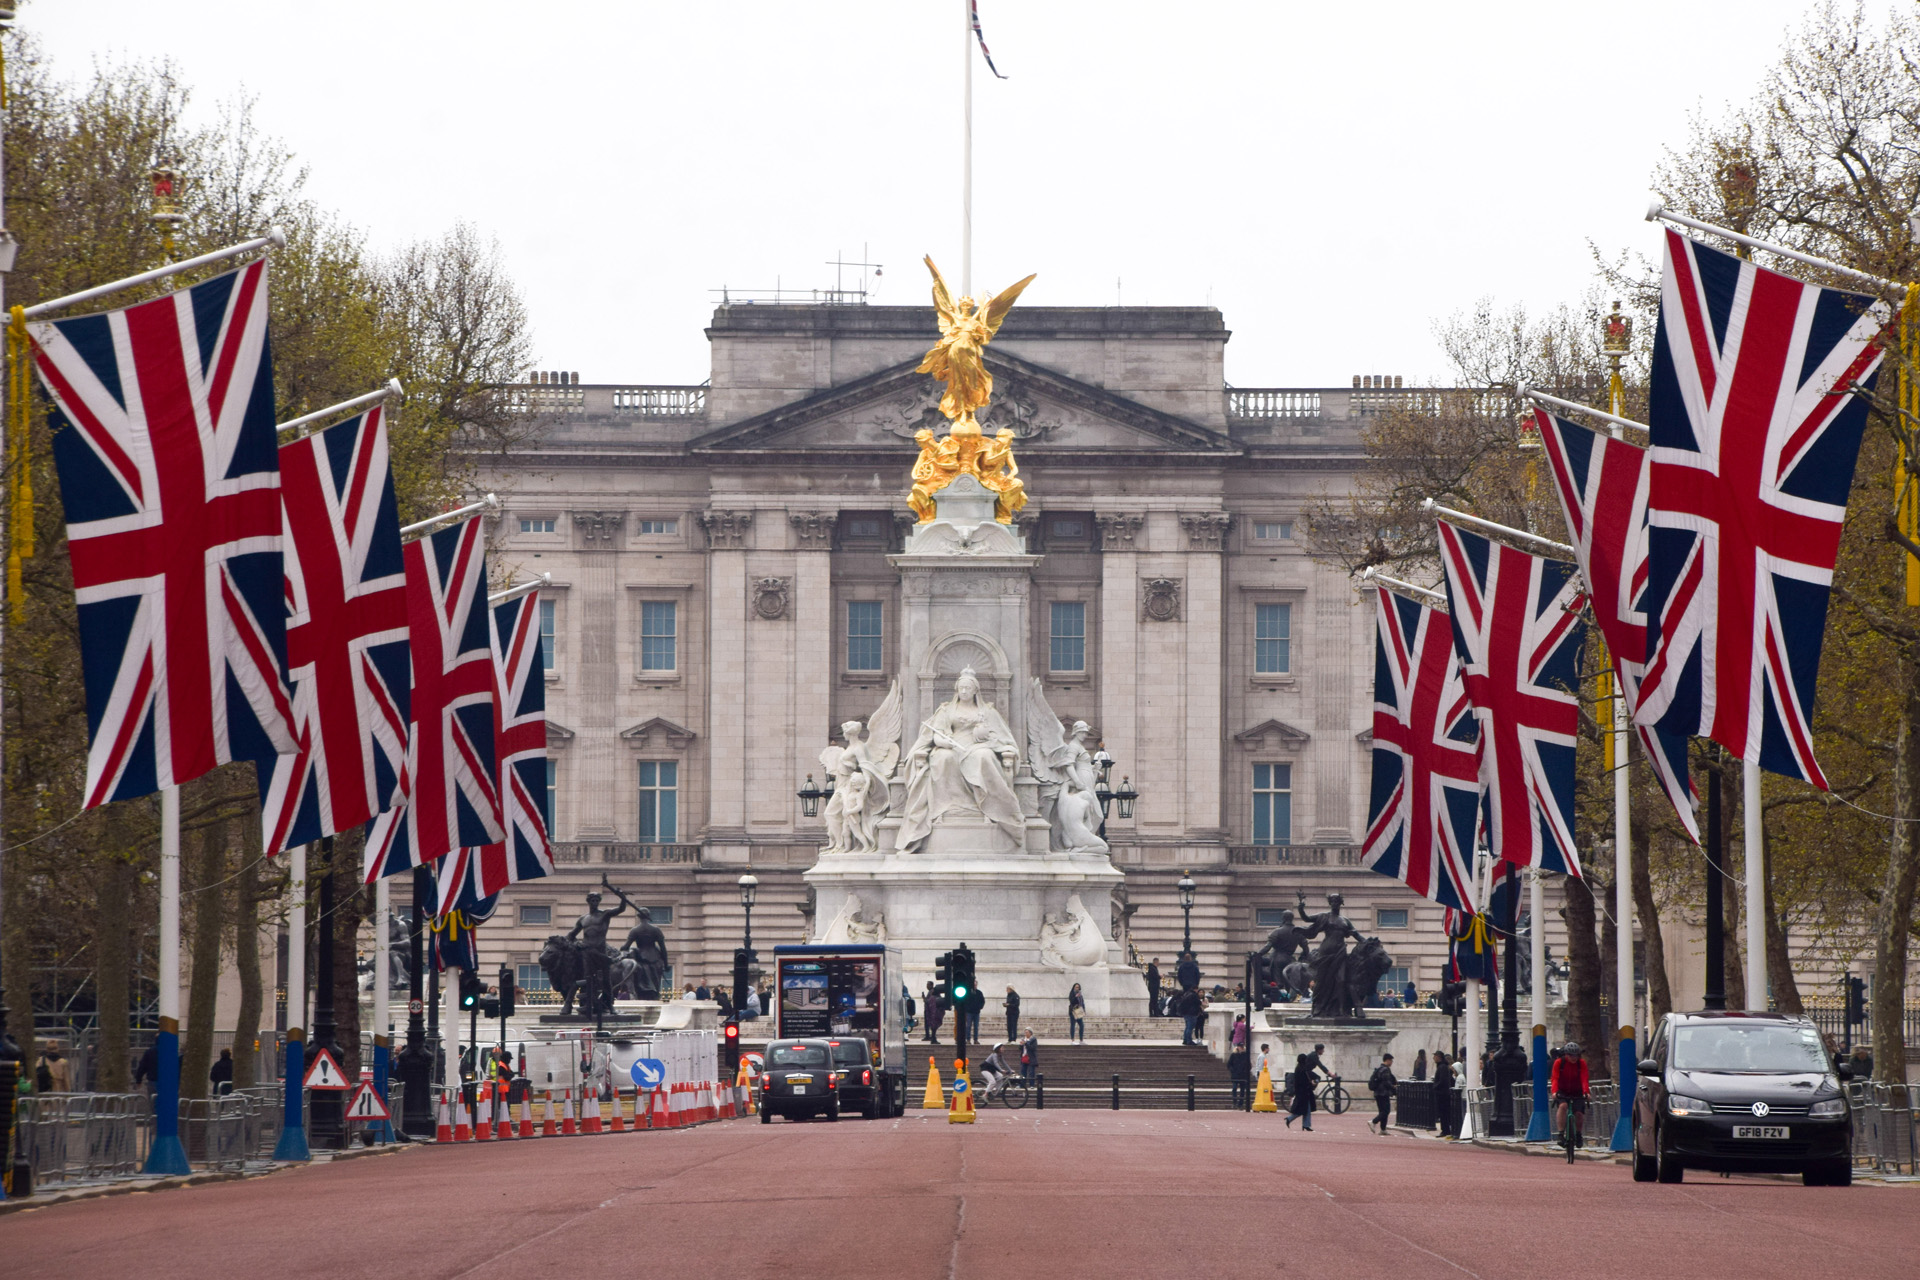 A view of Buckingham Palace and The Mall lined with Union Jack flags ahead of the coronation of King Charles III.